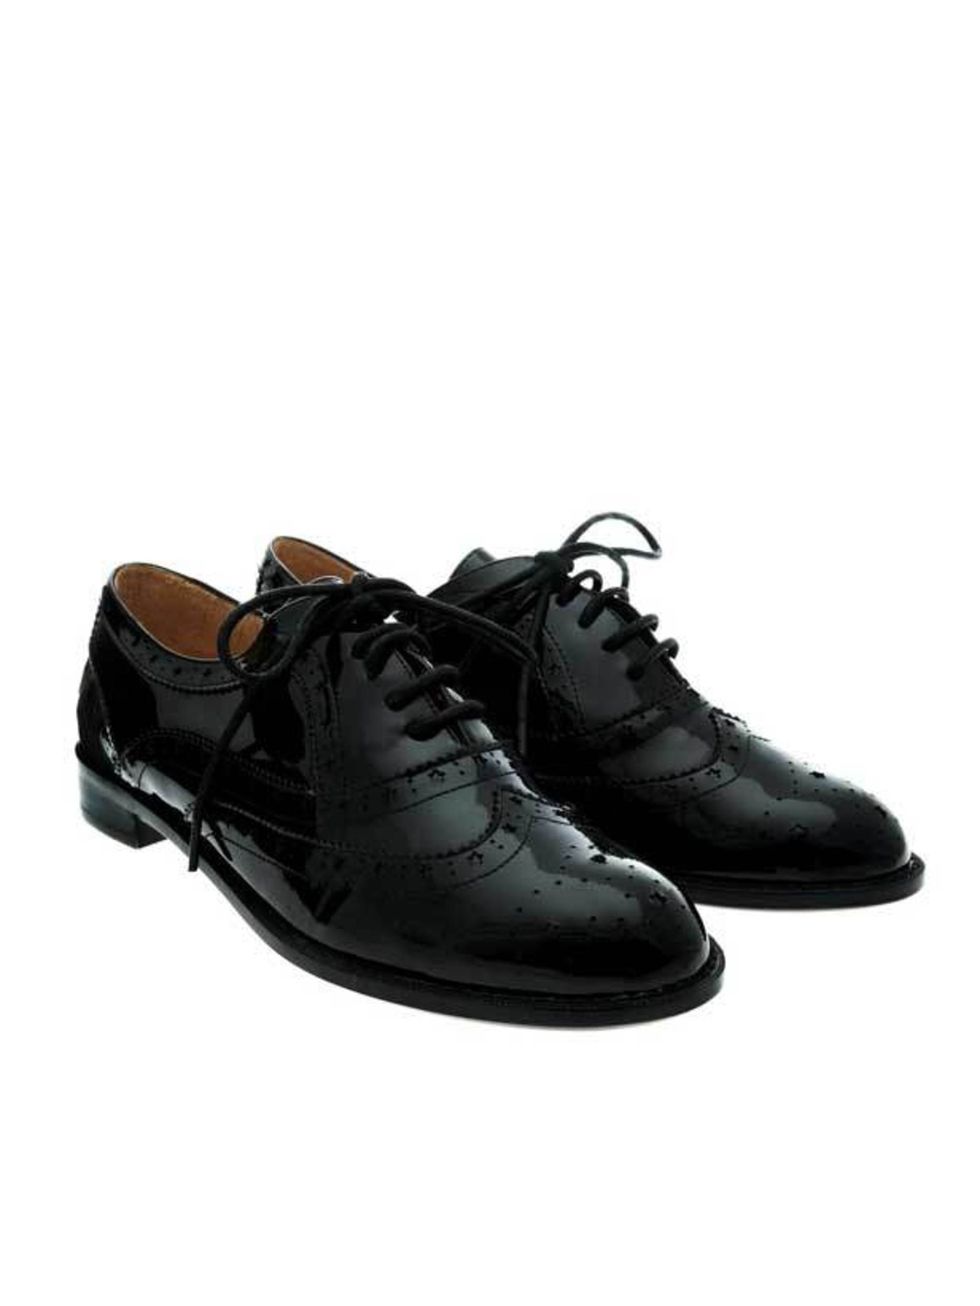 <p>F Troupe patent leather brogue, £105, at <a href="http://www.brownsfashion.com/product/designers/index/women/f-troupe/034852530002.htm">Browns</a> </p>